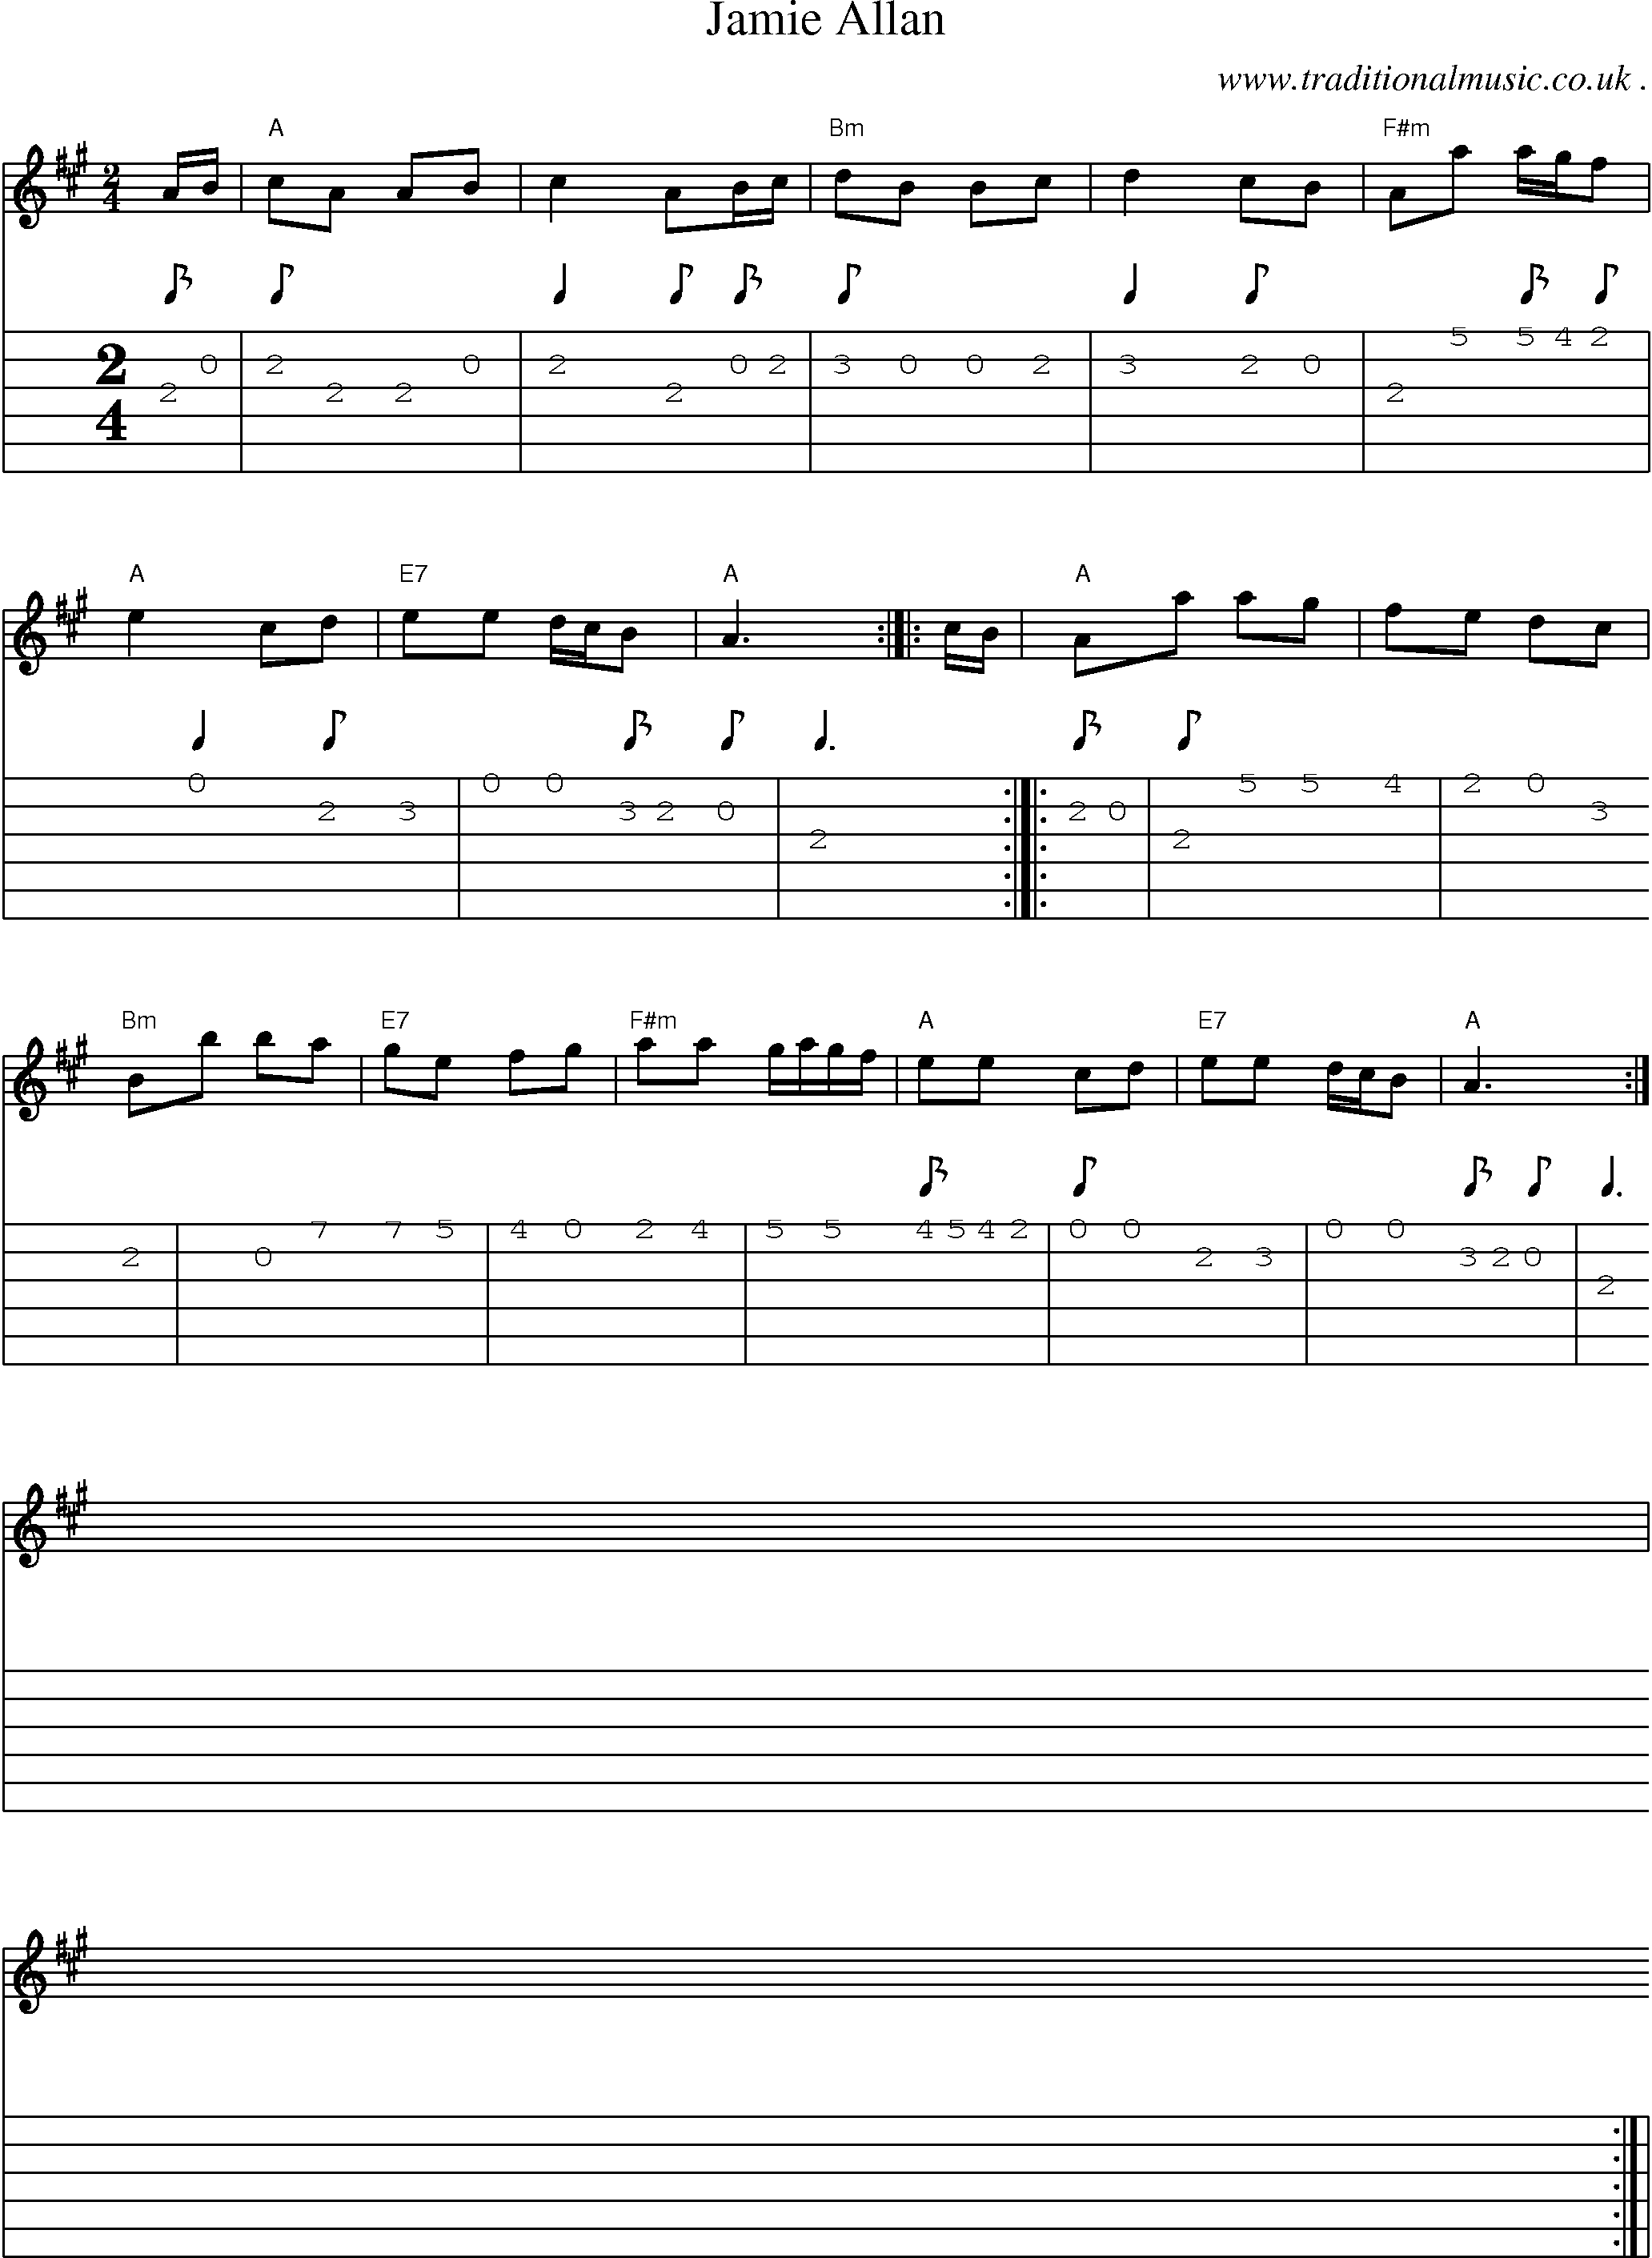 Sheet-music  score, Chords and Guitar Tabs for Jamie Allan